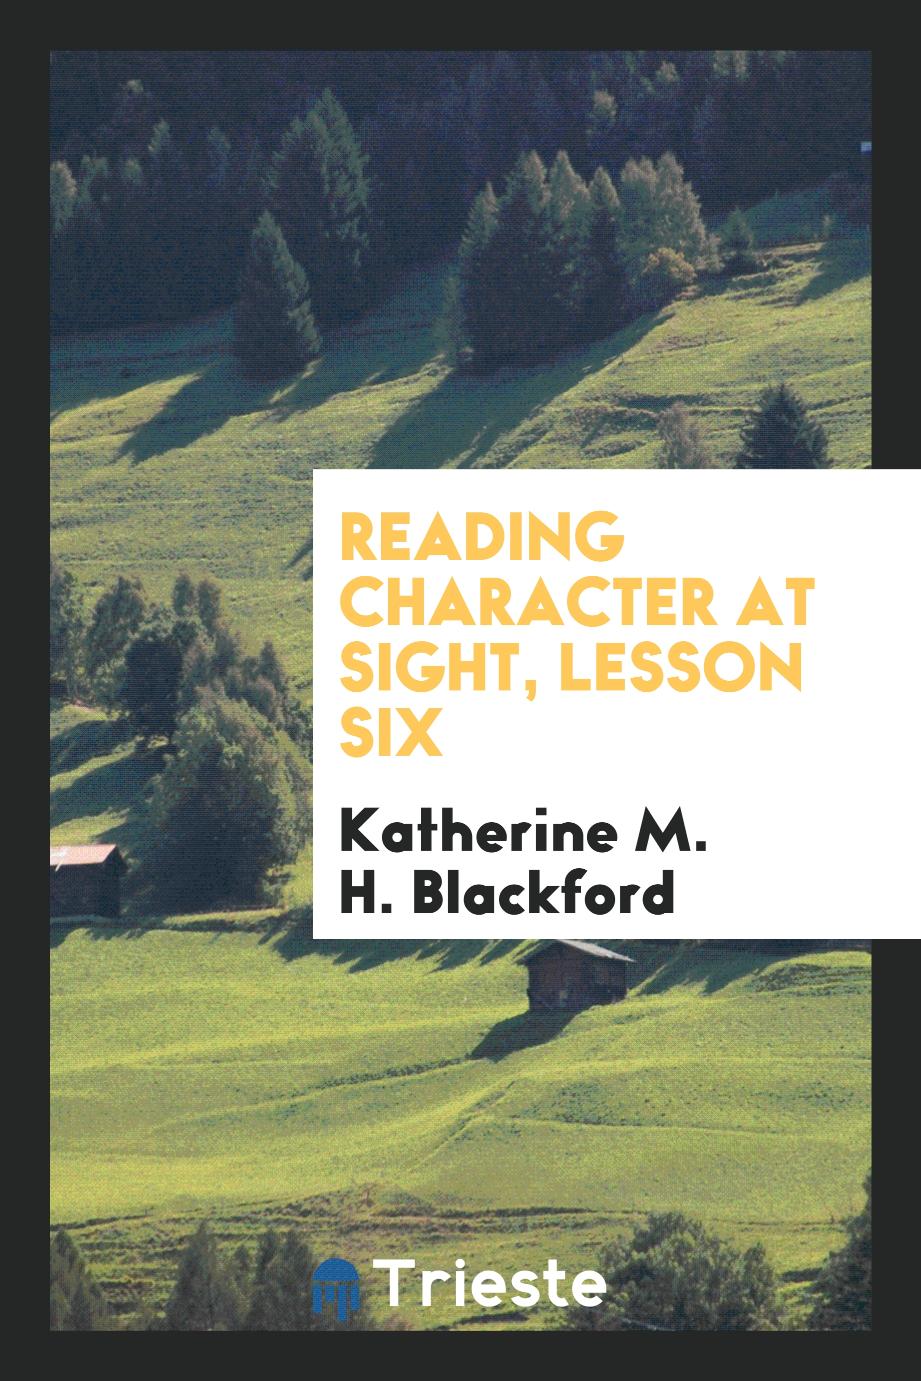 Reading Character at Sight, lesson six